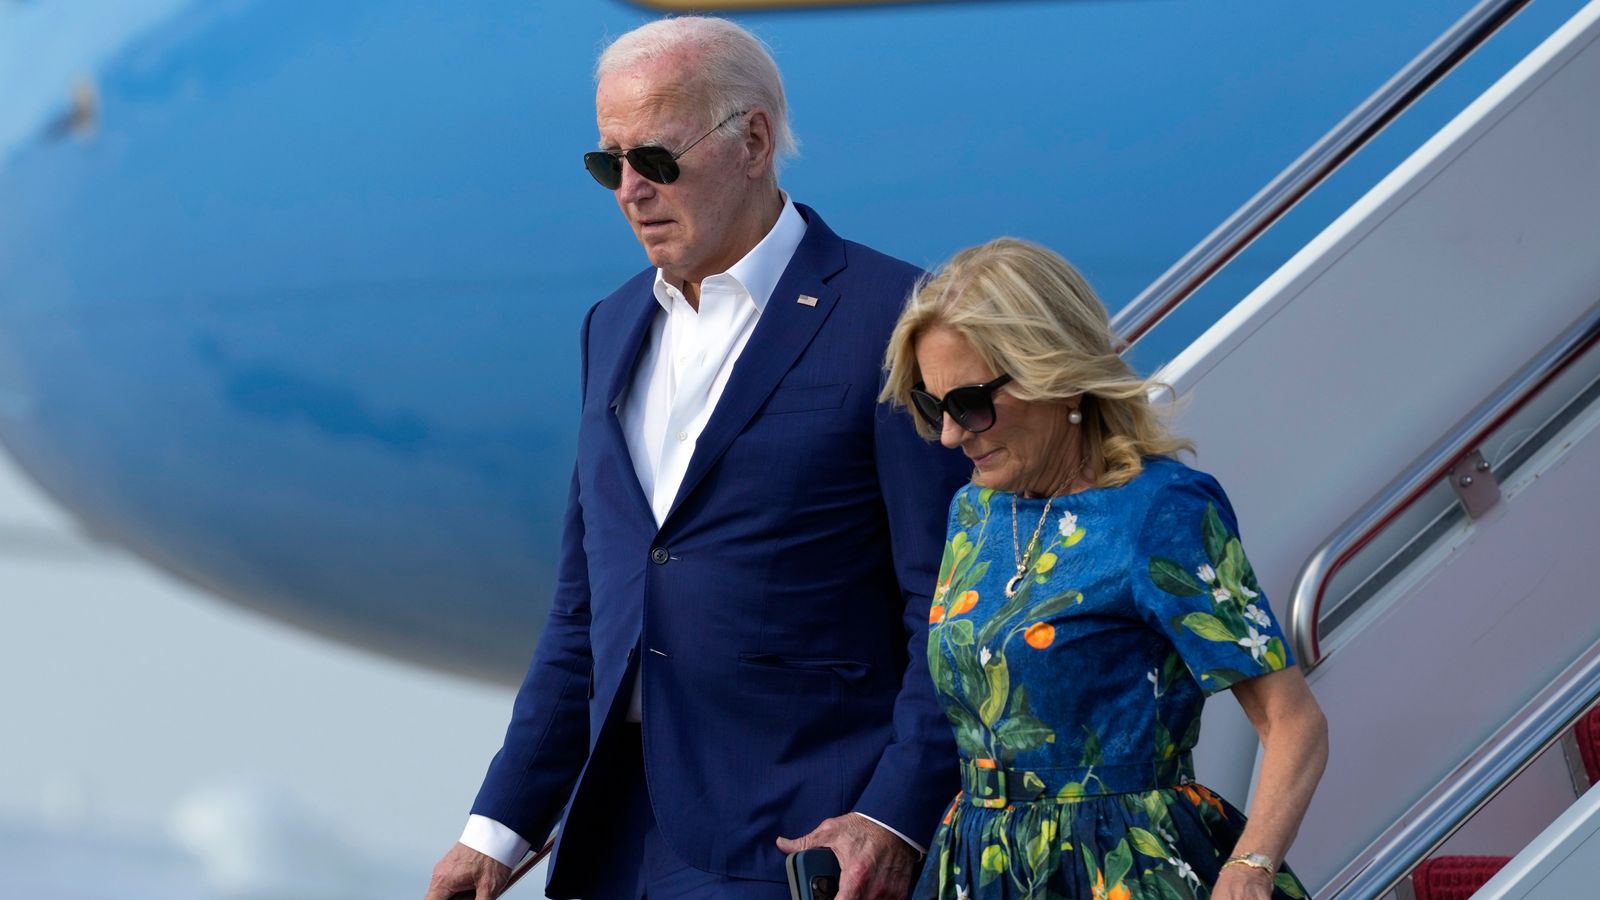 'Time to end it': Biden says he will stay in the race - and tells party to put drama aside